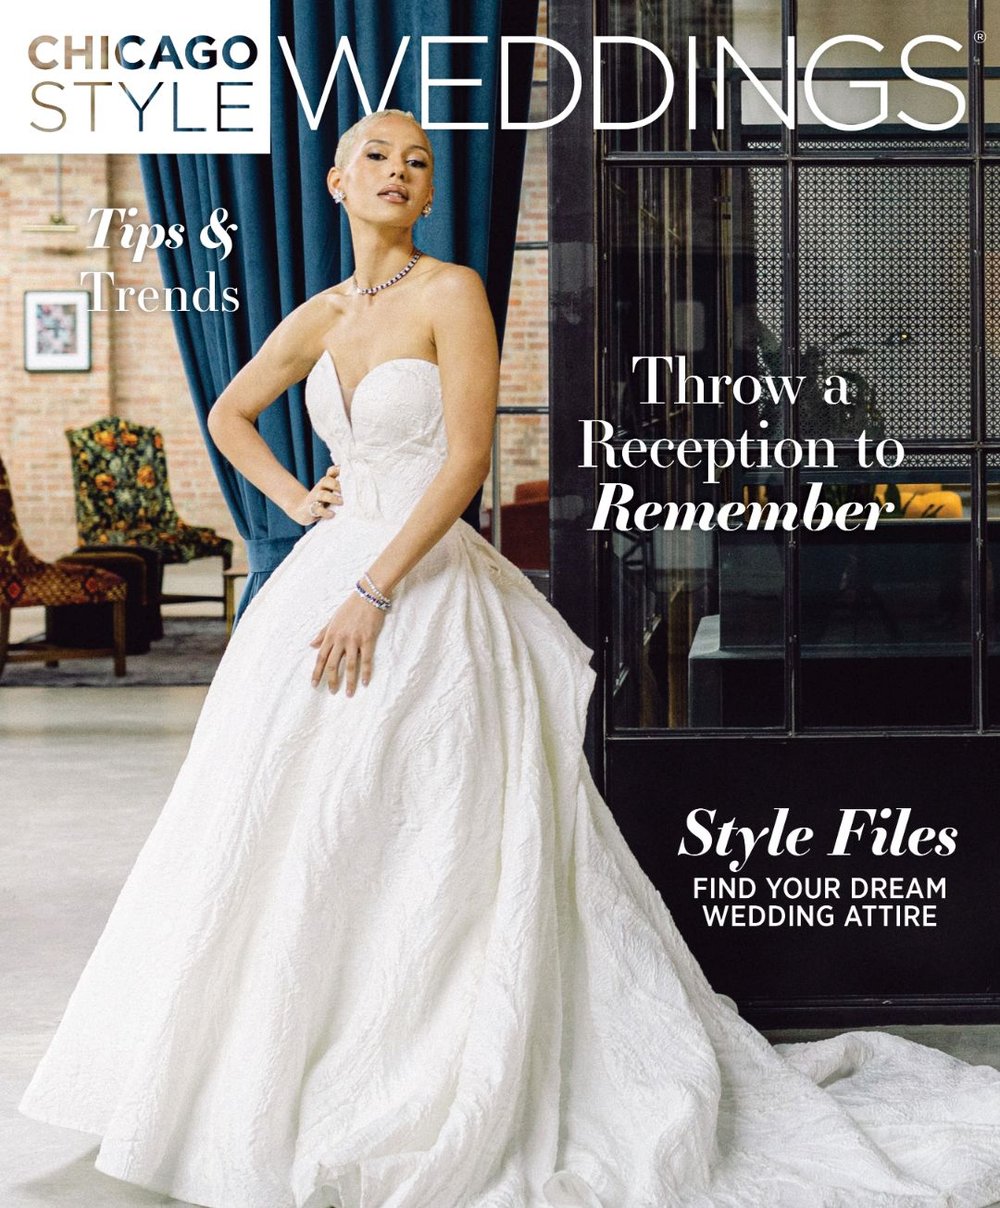 Model Alexandria Hill on the cover of Chicago Style Weddings Magazine